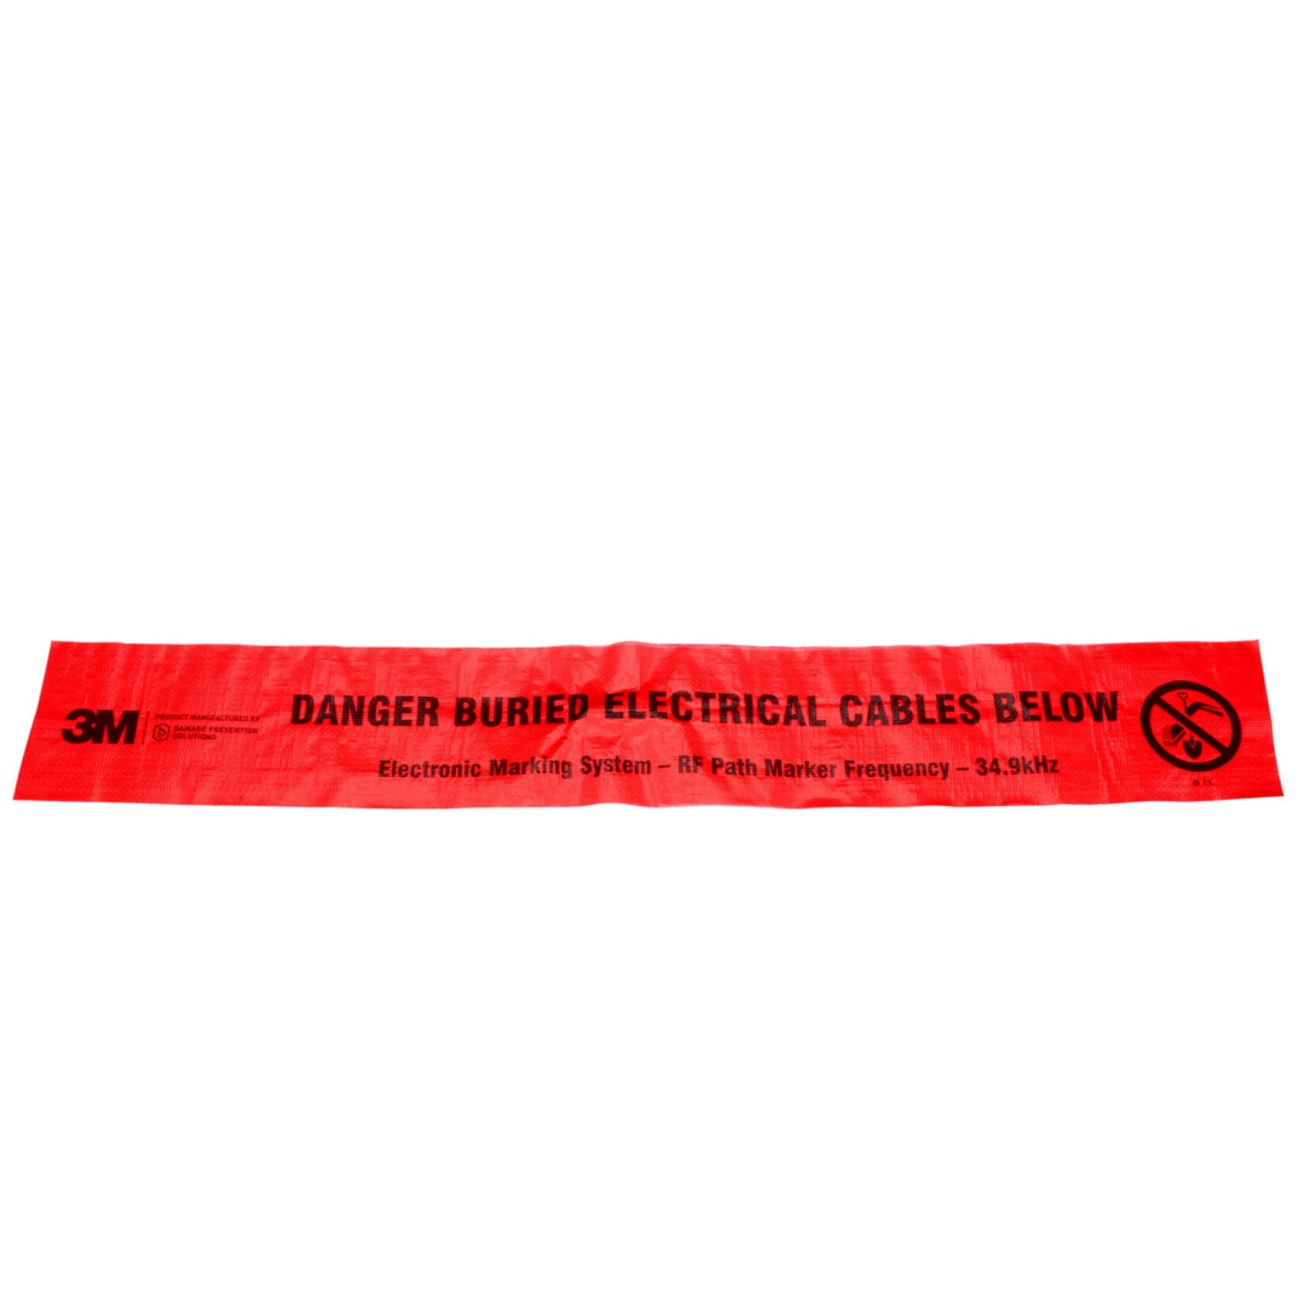 3M Electronic Marking System (EMS) hazard warning tape 7902, red, 152 mm, current, 152 m, 1 pack/packaging unit